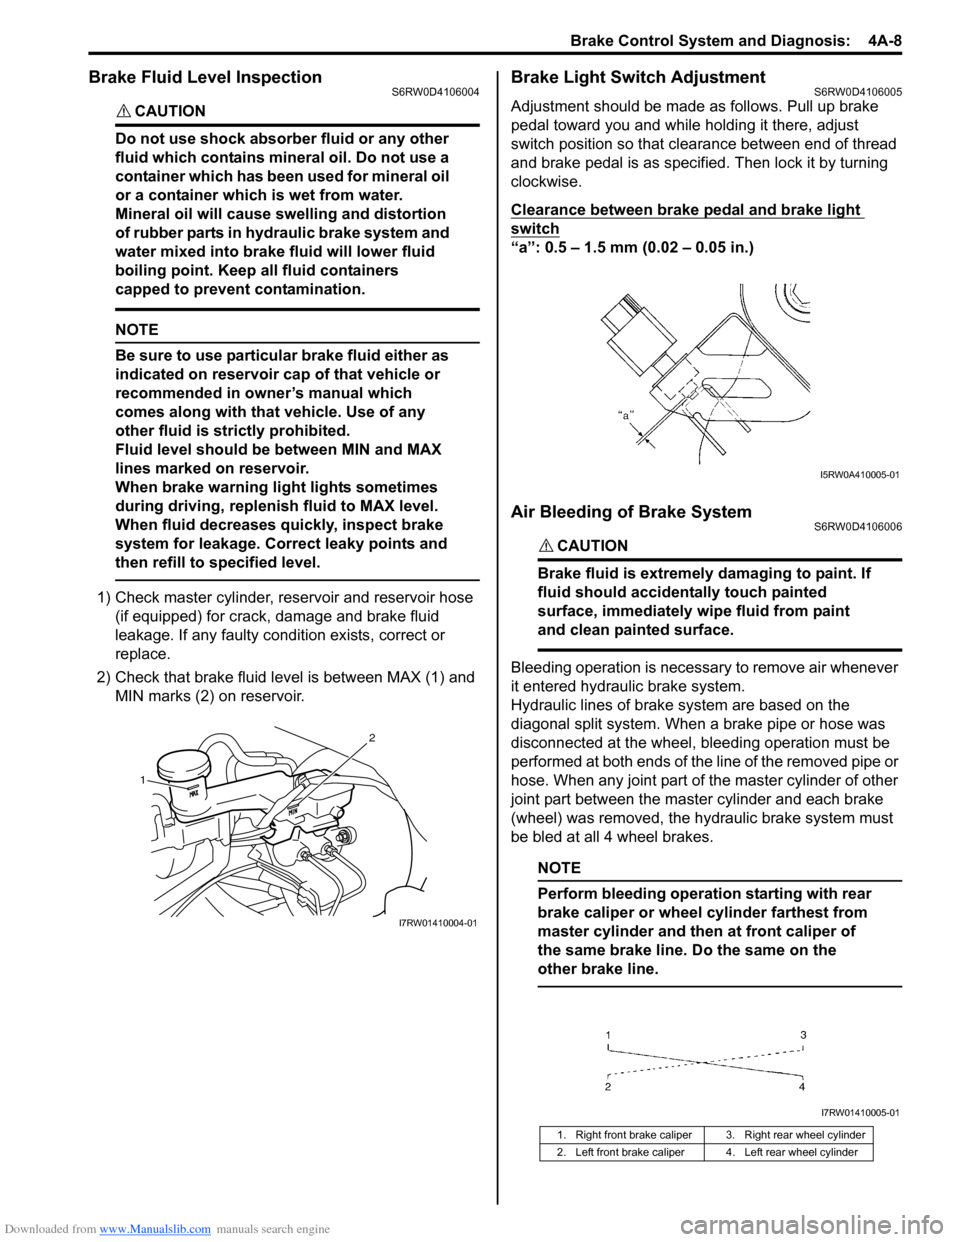 SUZUKI SX4 2006 1.G Service User Guide Downloaded from www.Manualslib.com manuals search engine Brake Control System and Diagnosis:  4A-8
Brake Fluid Level InspectionS6RW0D4106004
CAUTION! 
Do not use shock absorber fluid or any other 
flu